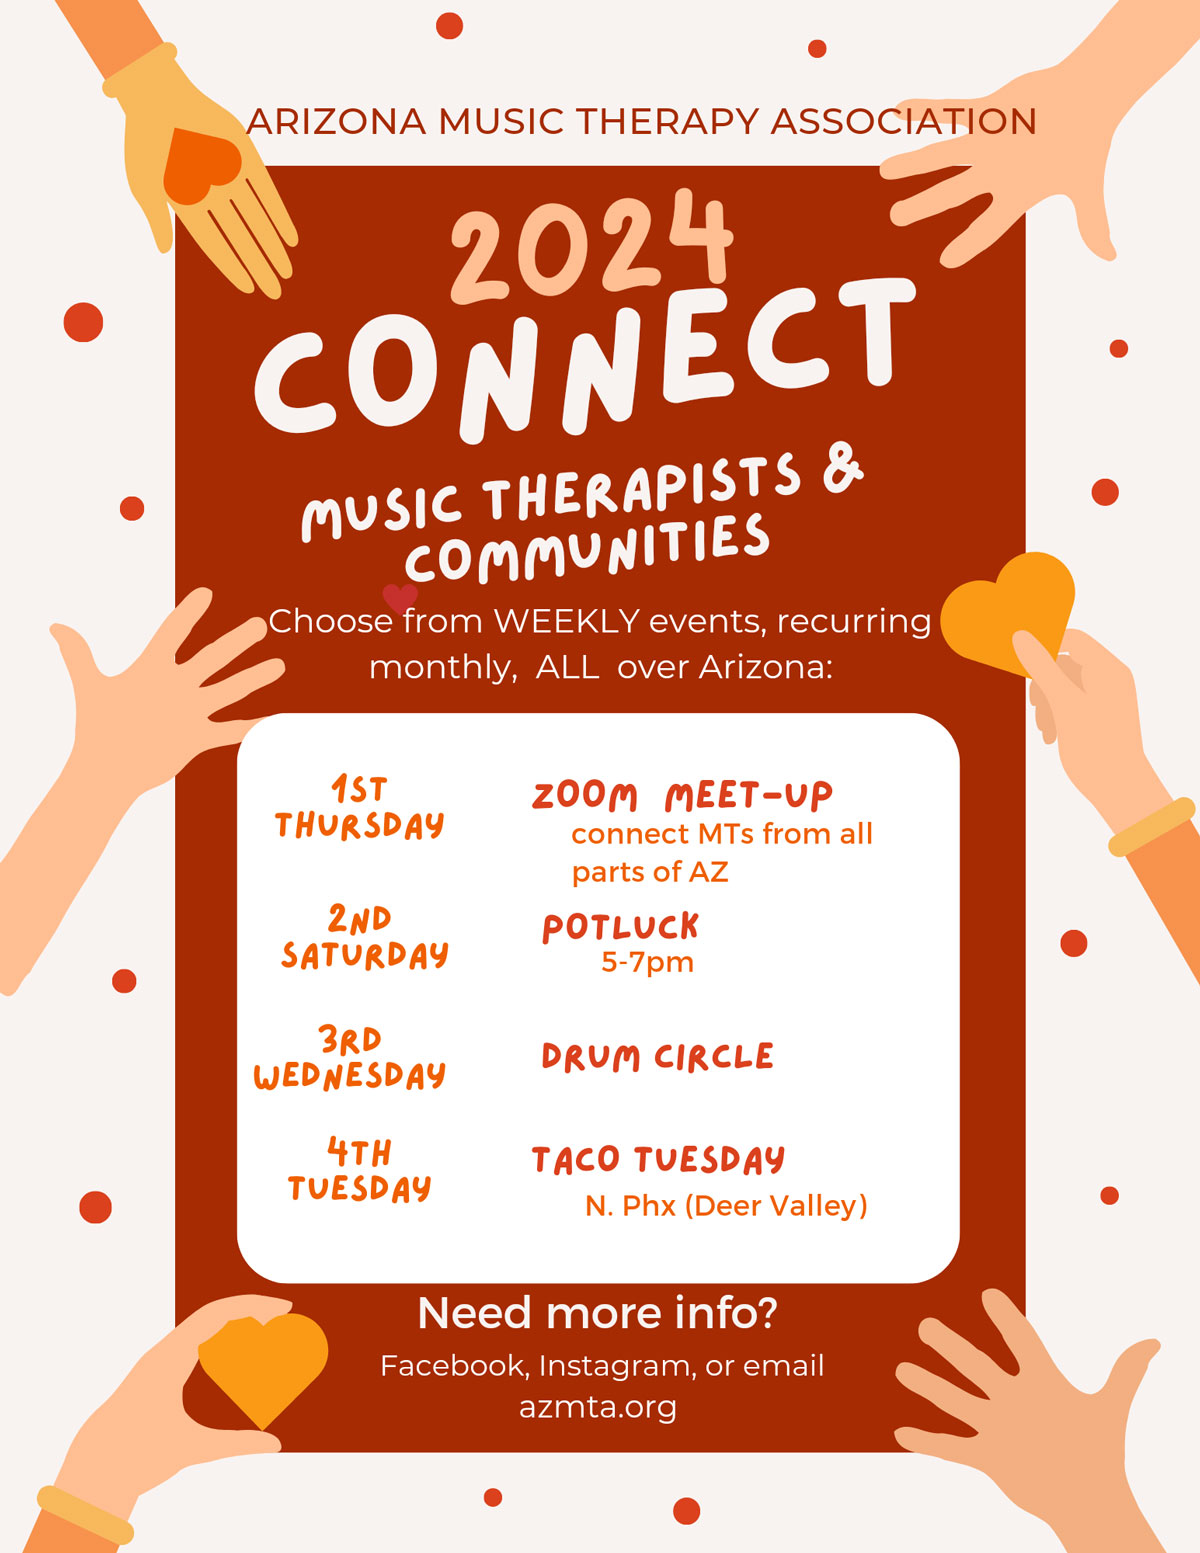 2024 Connect | 1st Thursday - ZOOM MEET-UP - connect MTs from all parts of AZ | 2nd Saturday - POTLUCK - 5-7pm | 3rd Wednesday - DRUM CIRCLE | 4th Tuesday - TACO TUESDAY - N. Phx (Deer Valley) | Need more info? Facebook, Instagram, or email azmta.org